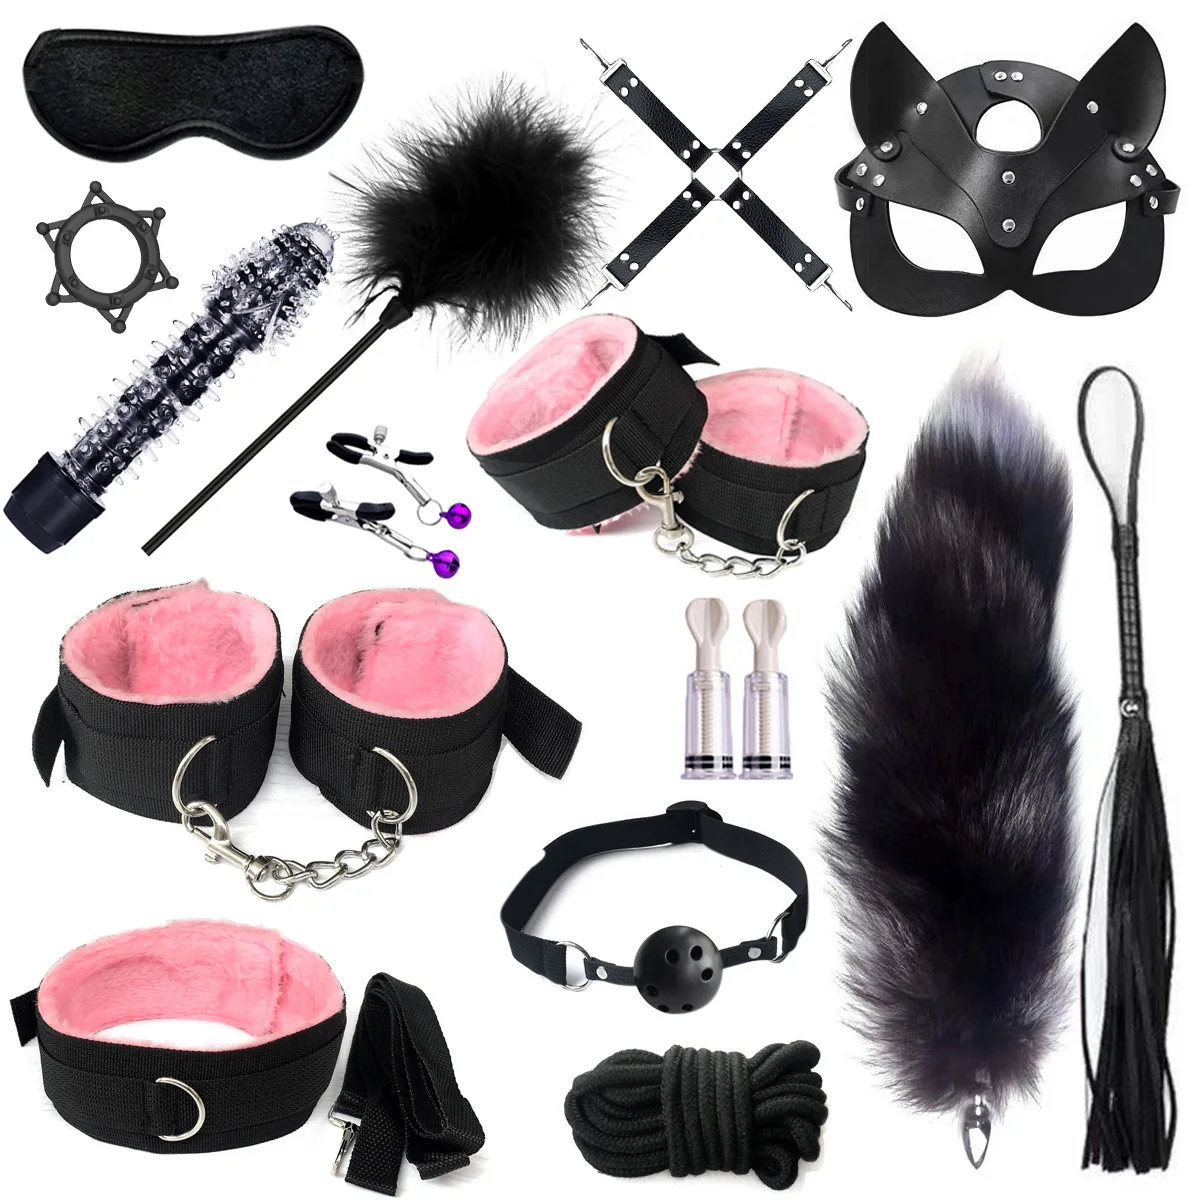 Sexy BDSM Plush Bondage Bundle Set Blindfold Handcuffs Whip Sex Toys for Women Nipple Clip Butt Plug Exotic Adult Products